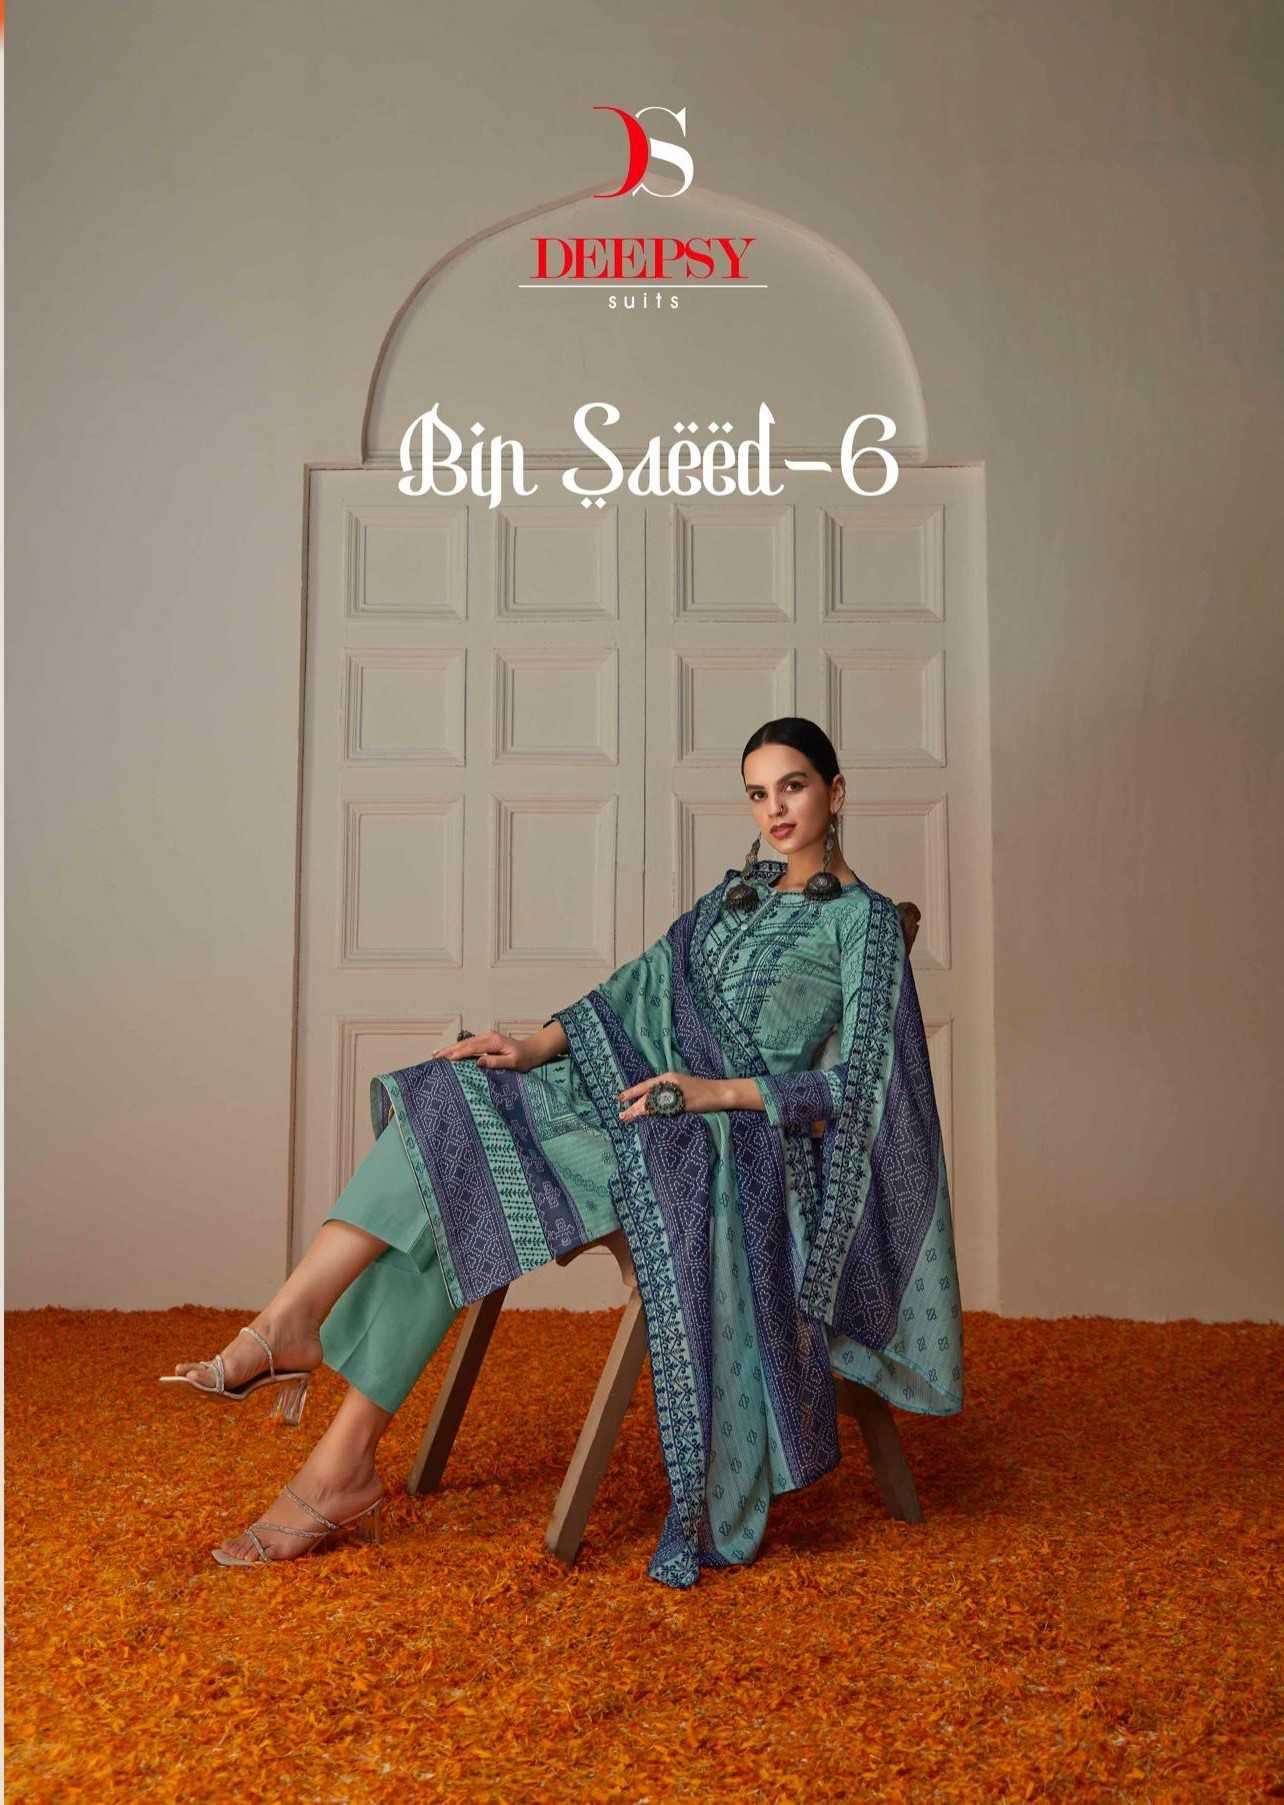 deepsy suits bin saeed vol 6 COTTON WITH EMBROIDERY WORK SUM...